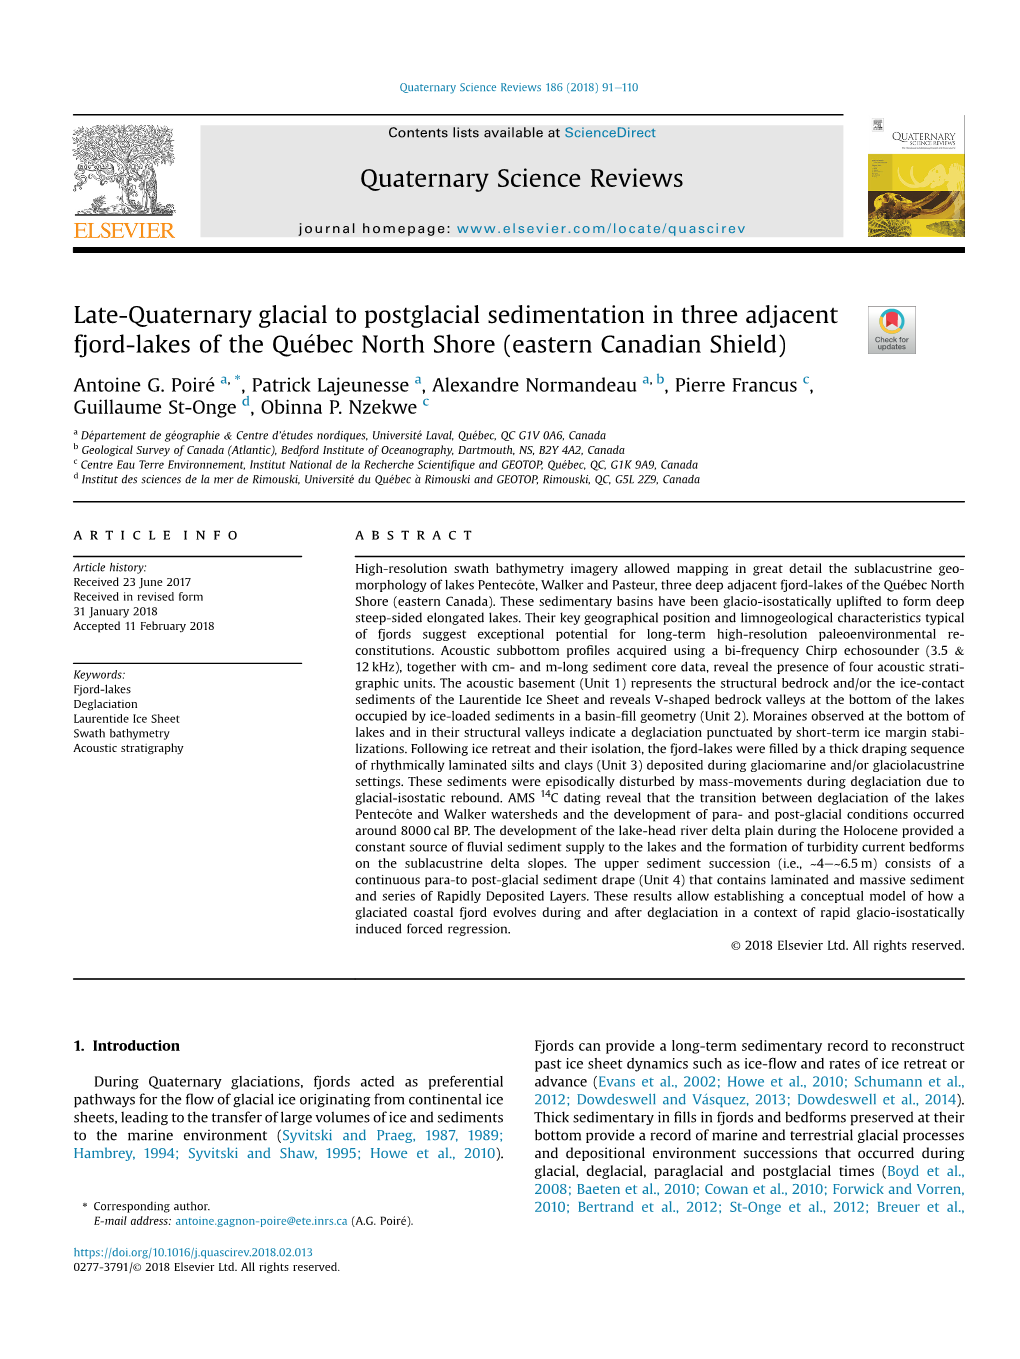 Late-Quaternary Glacial to Postglacial Sedimentation in Three Adjacent Fjord-Lakes of the Quebec� North Shore (Eastern Canadian Shield)